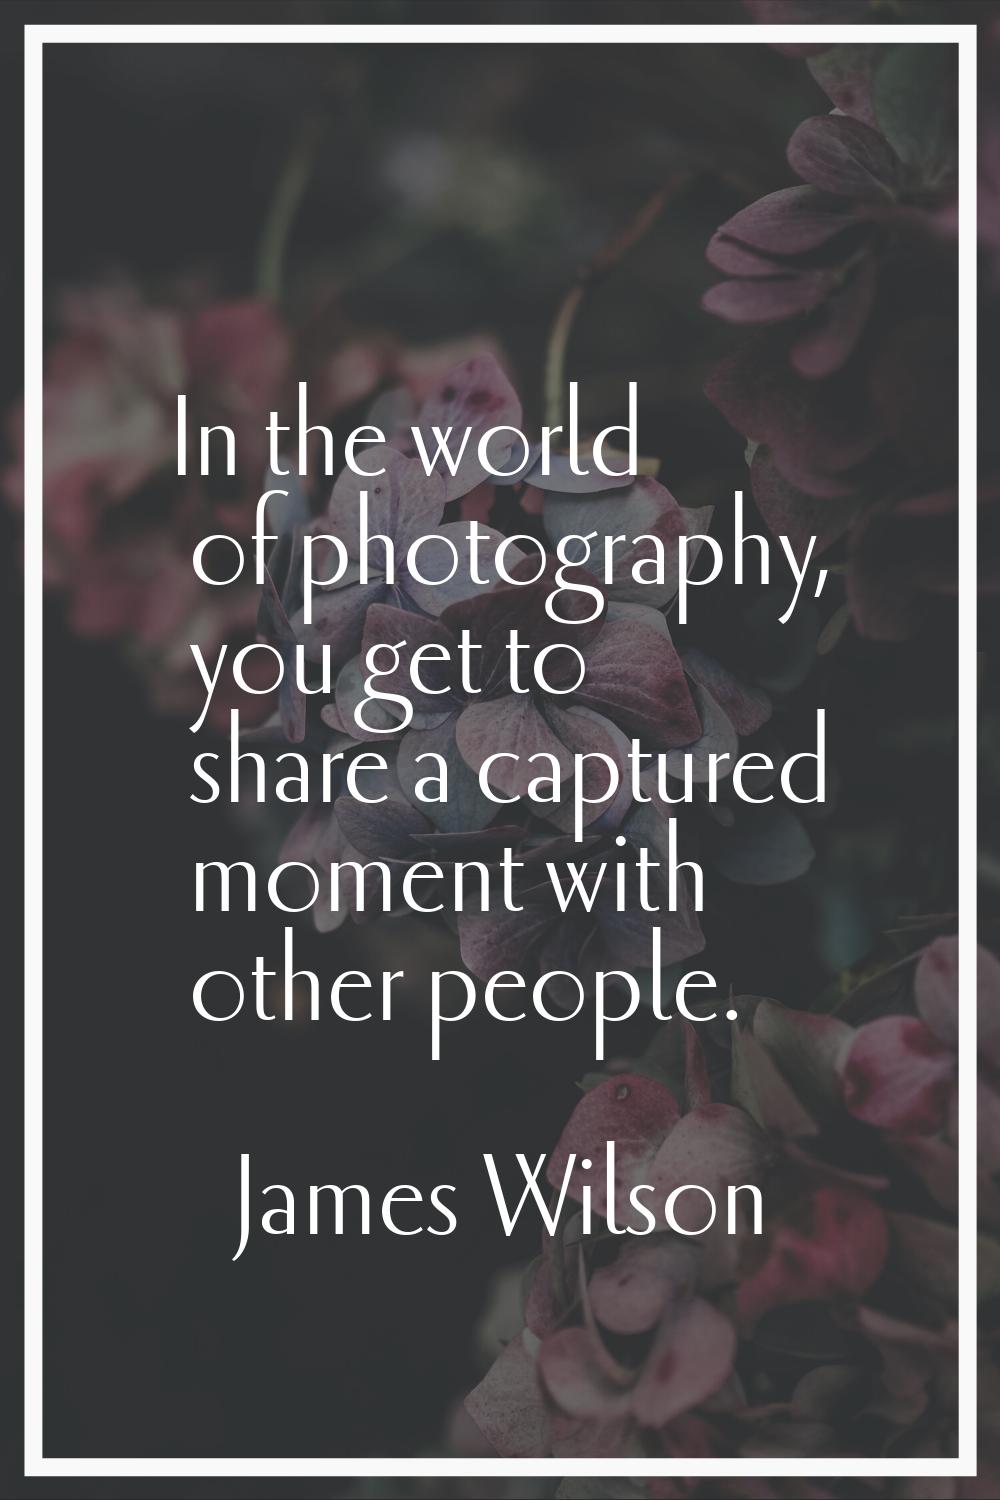 In the world of photography, you get to share a captured moment with other people.